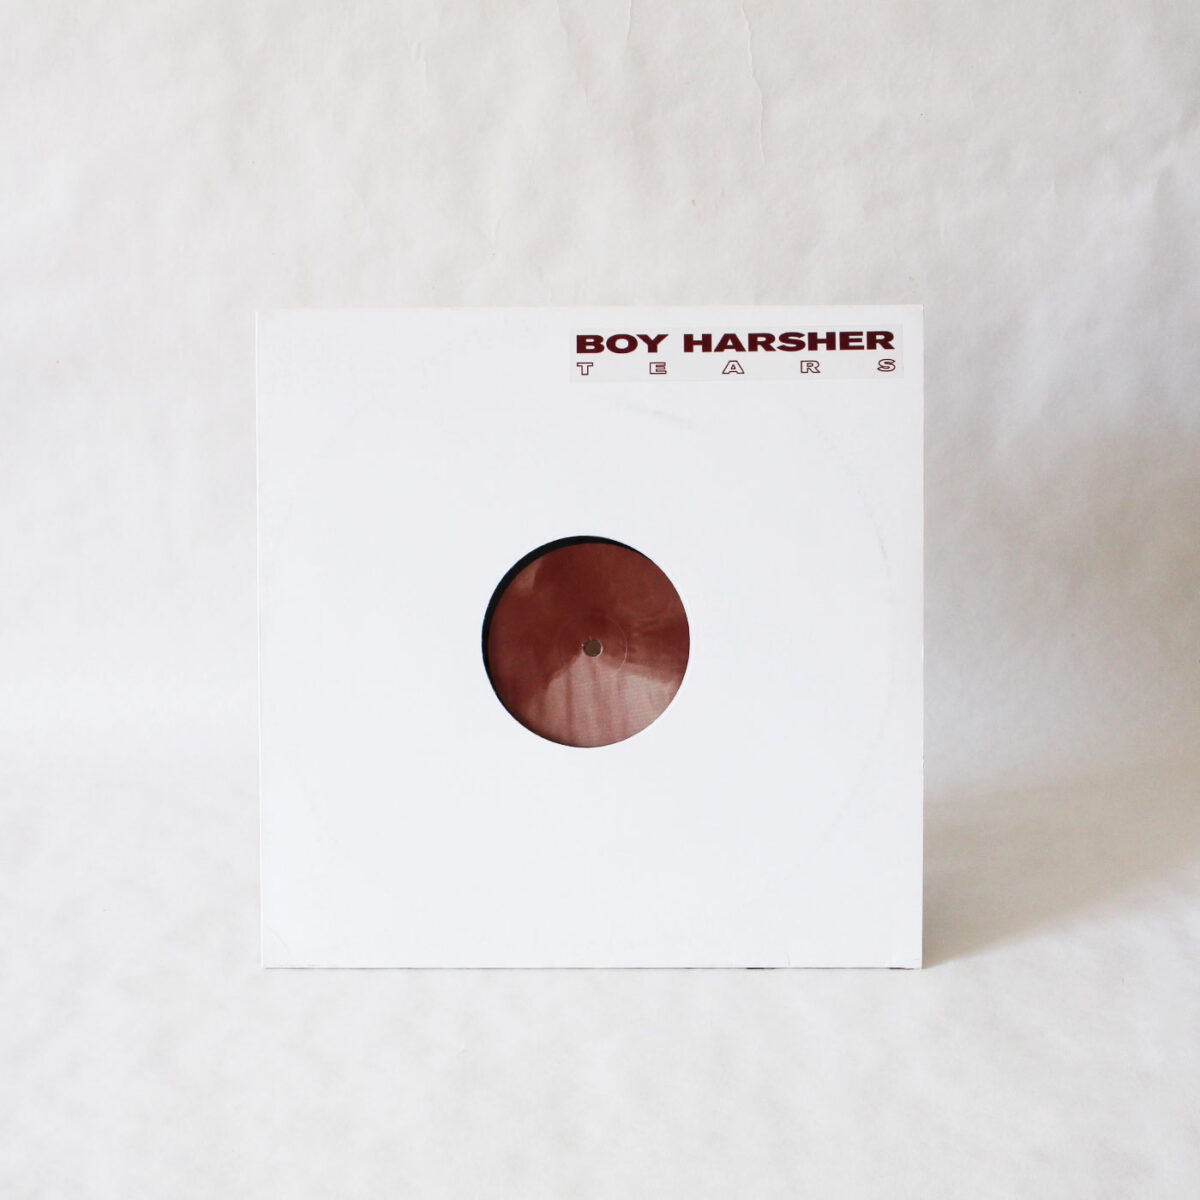 Boy Harsher - Tears Vinyl Second Hand Synth-pop Industrial Techno